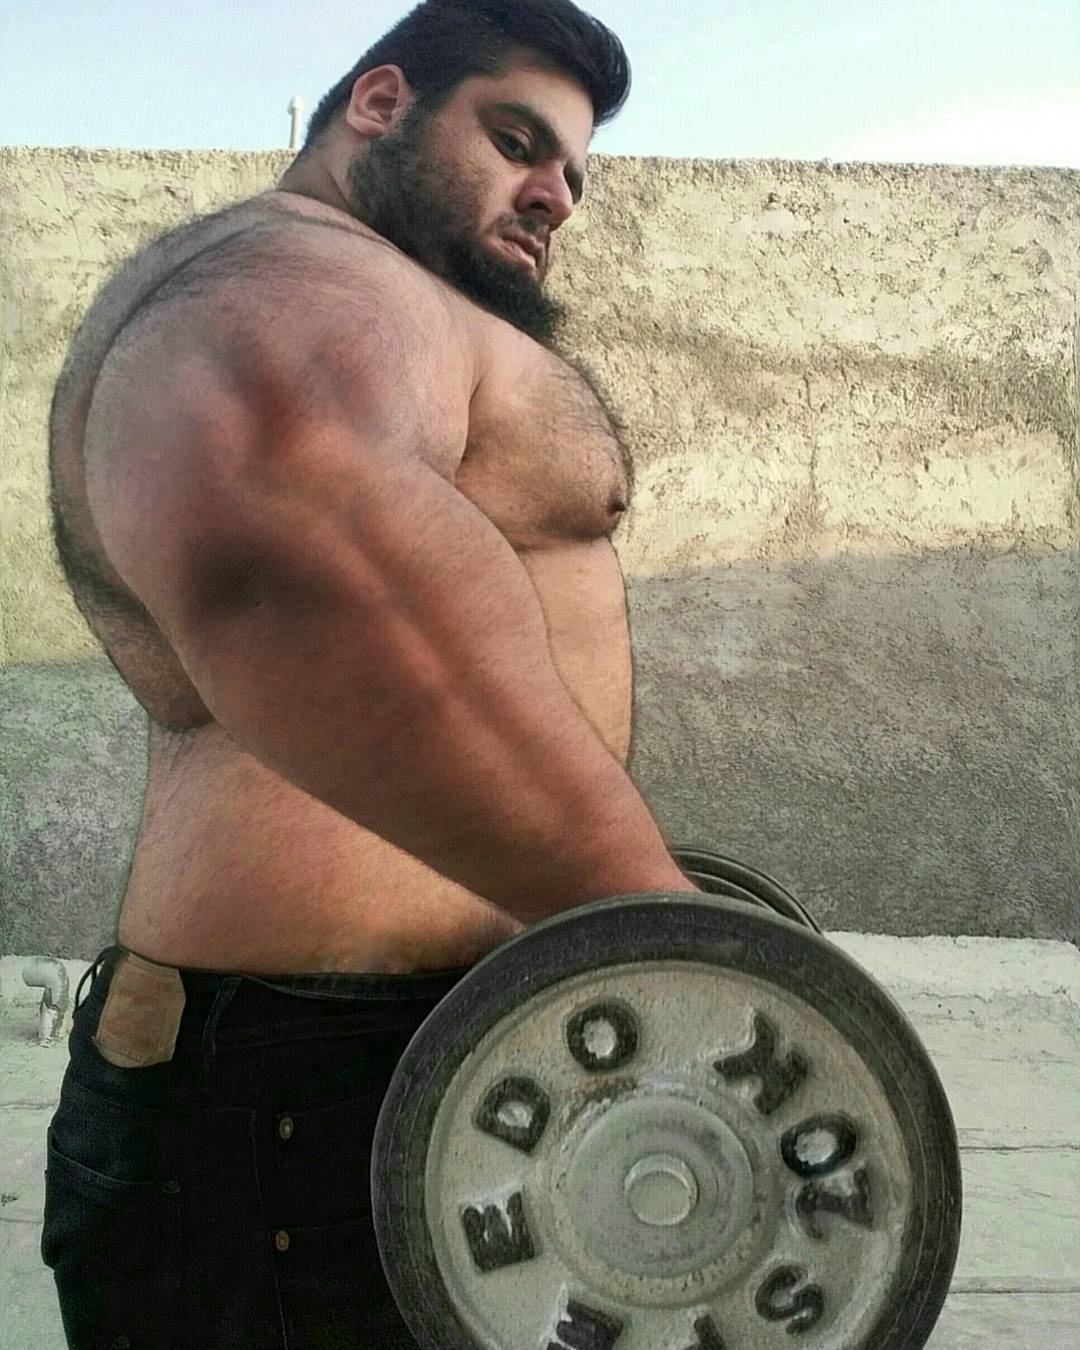 Gharibli is able to lift huge weights with ease, and his muscles are a force to be reckoned with.